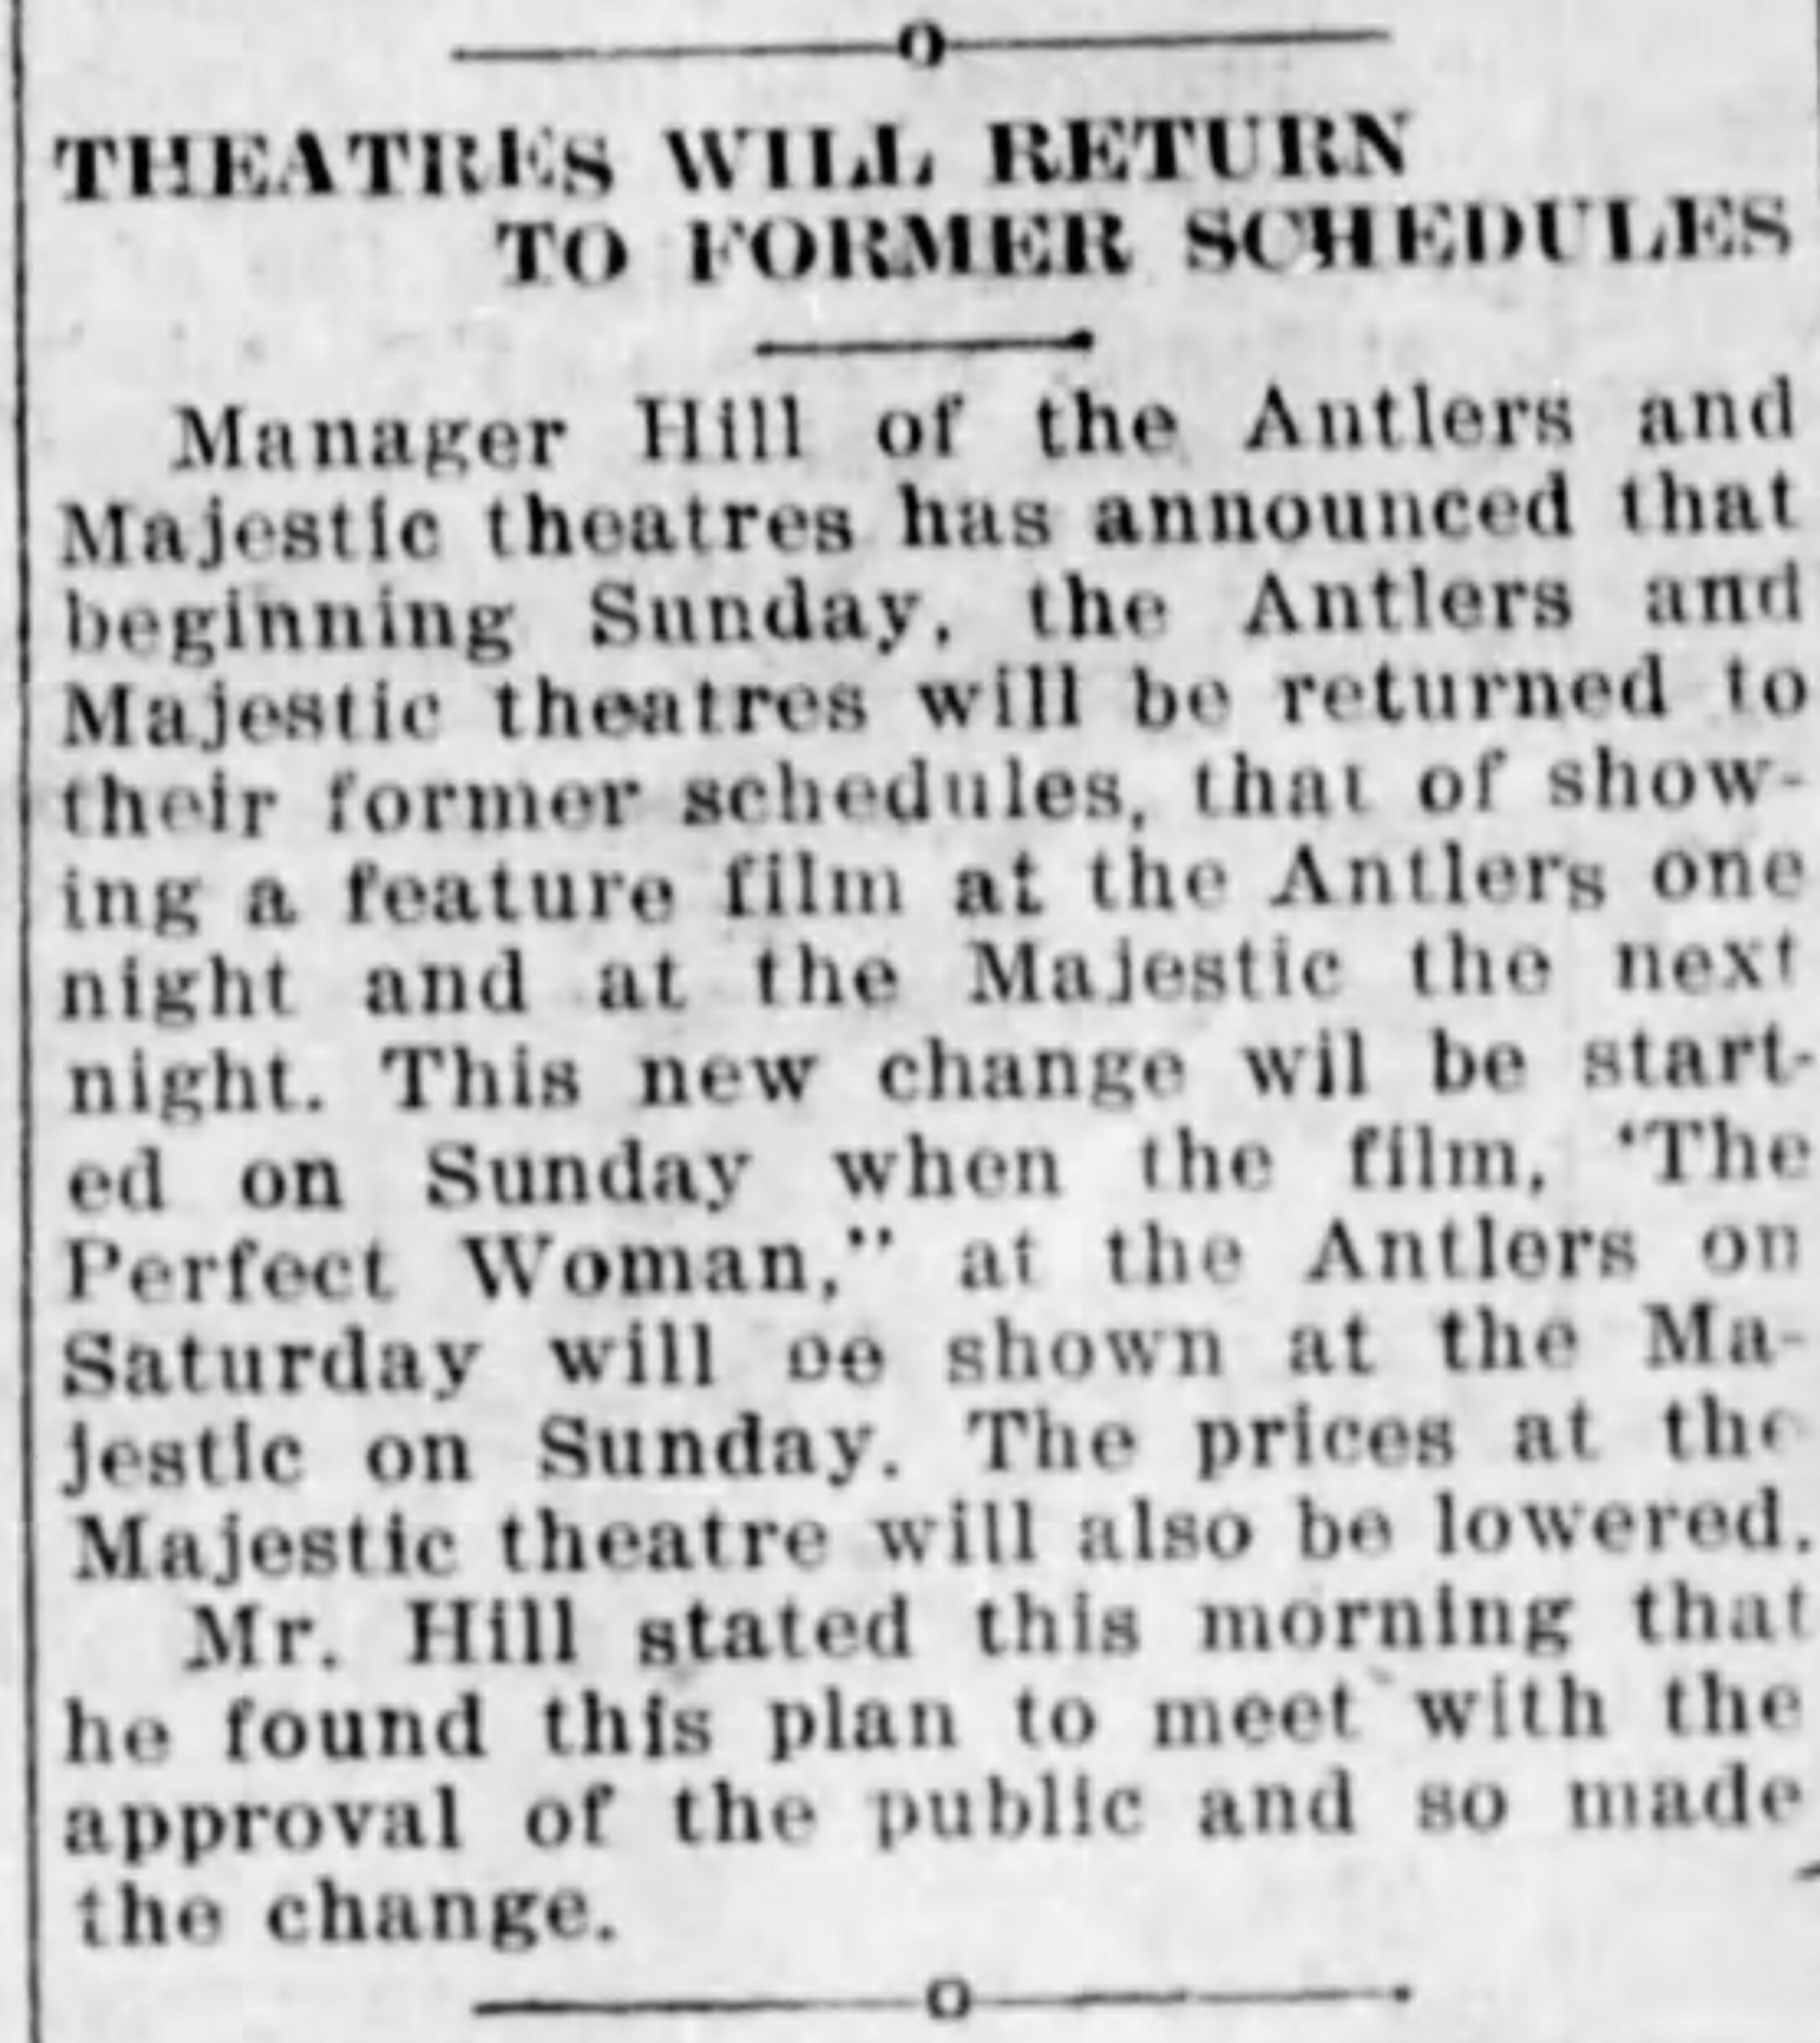 Sunday shows resume at the Majestic, 1922